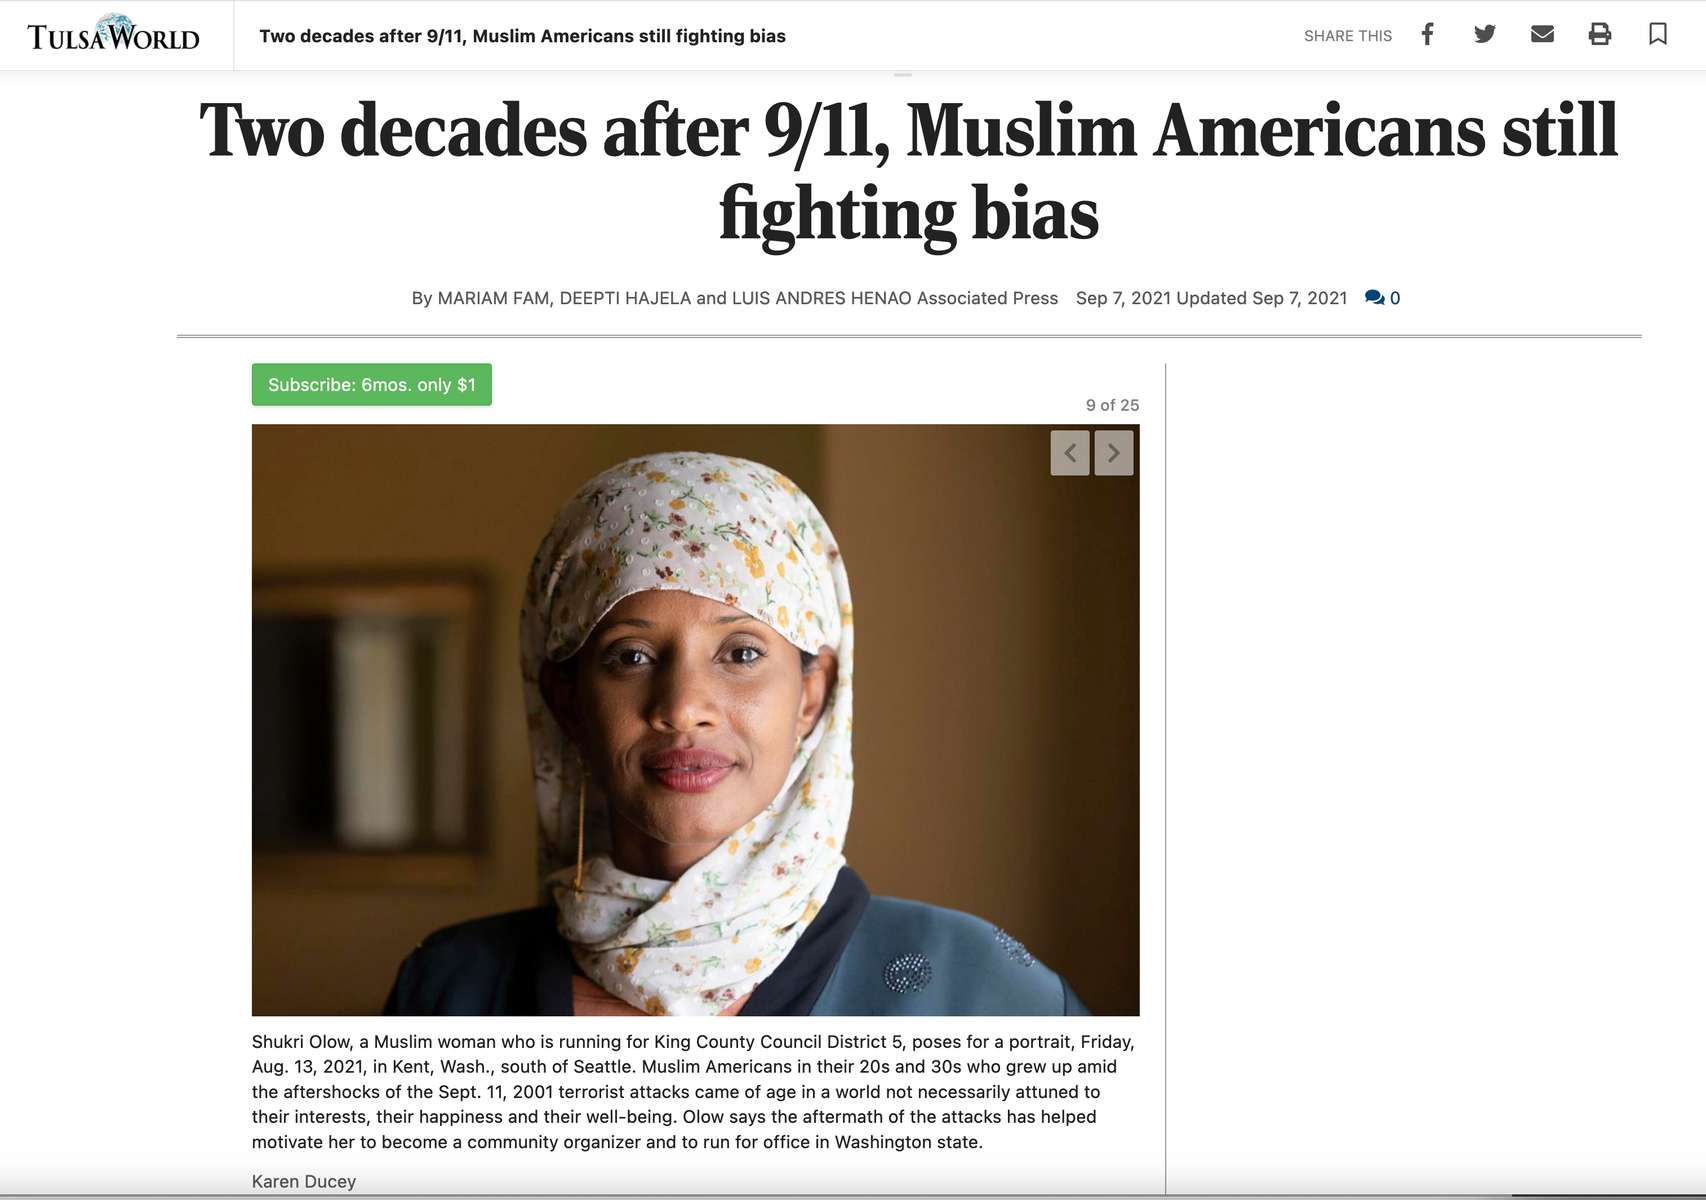 {quote}Two decades after 9/11, Muslim Americans still fighting bias{quote} Photos shot for the Associated Press, published in the Tulsa World on September 7, 2021